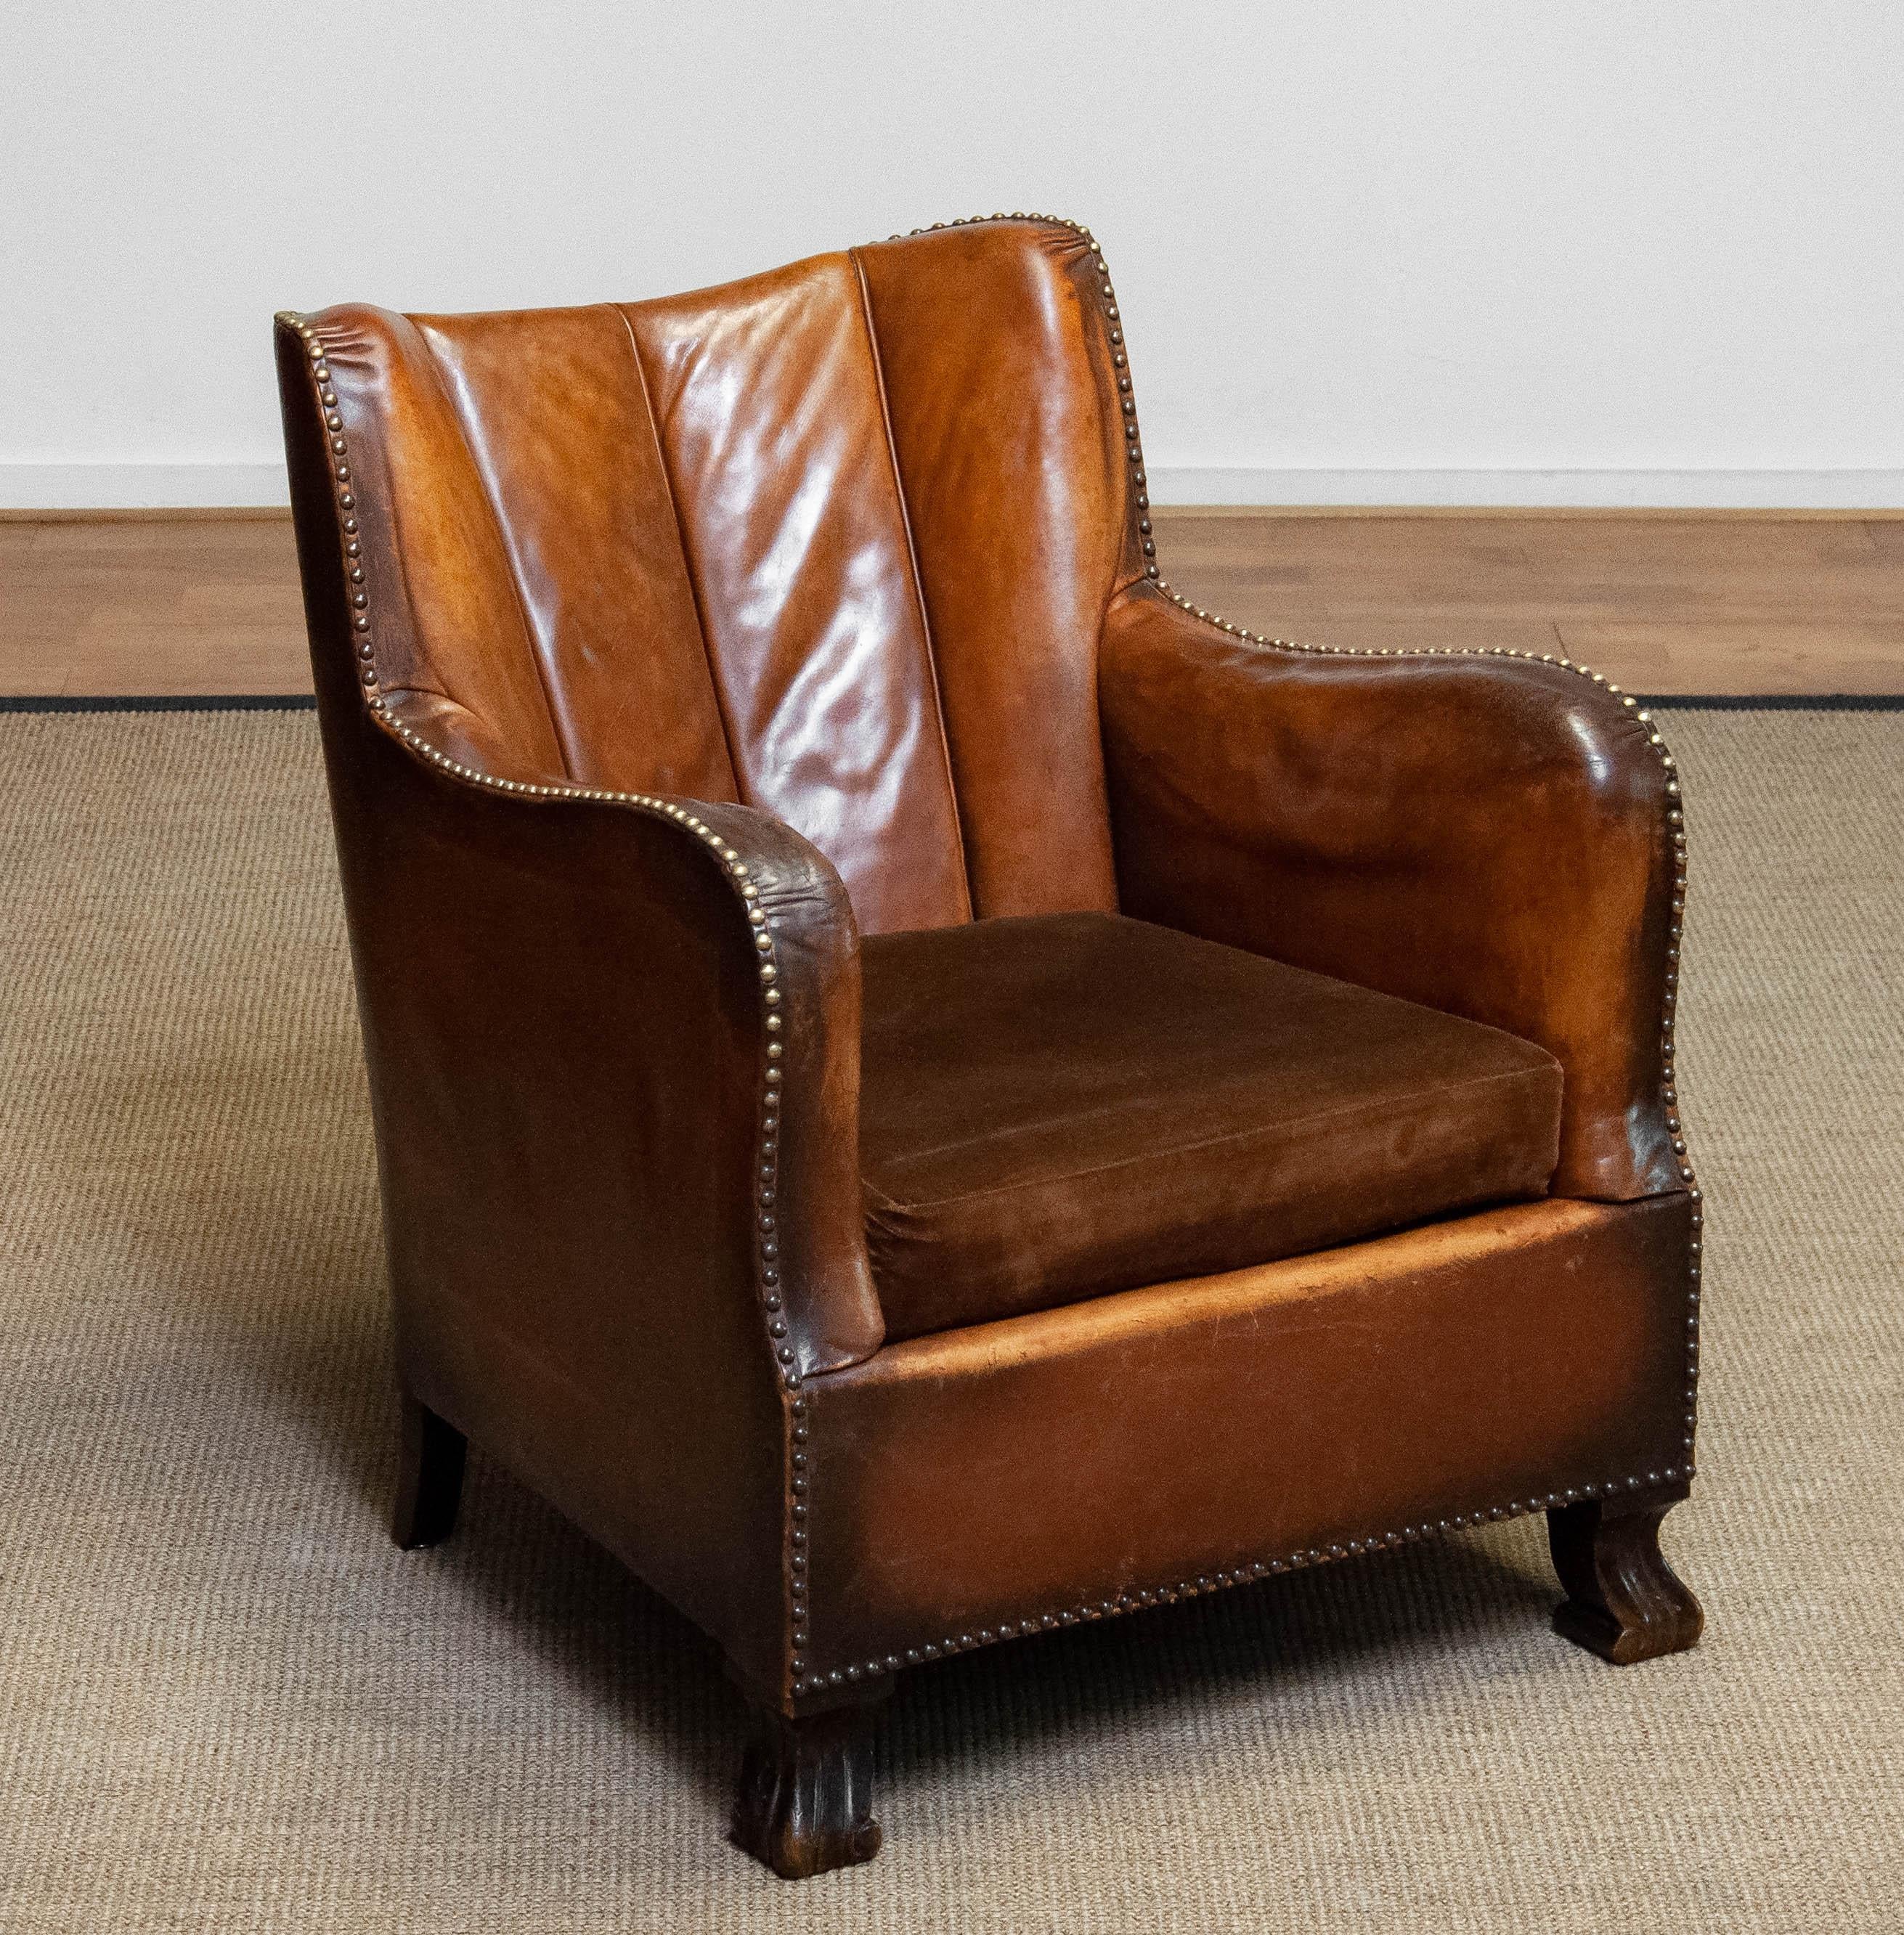 The 1930s Club Chair in Tan Brown Patinated Leather in the Style of Fritz Hansen (Moderne der Mitte des Jahrhunderts) im Angebot